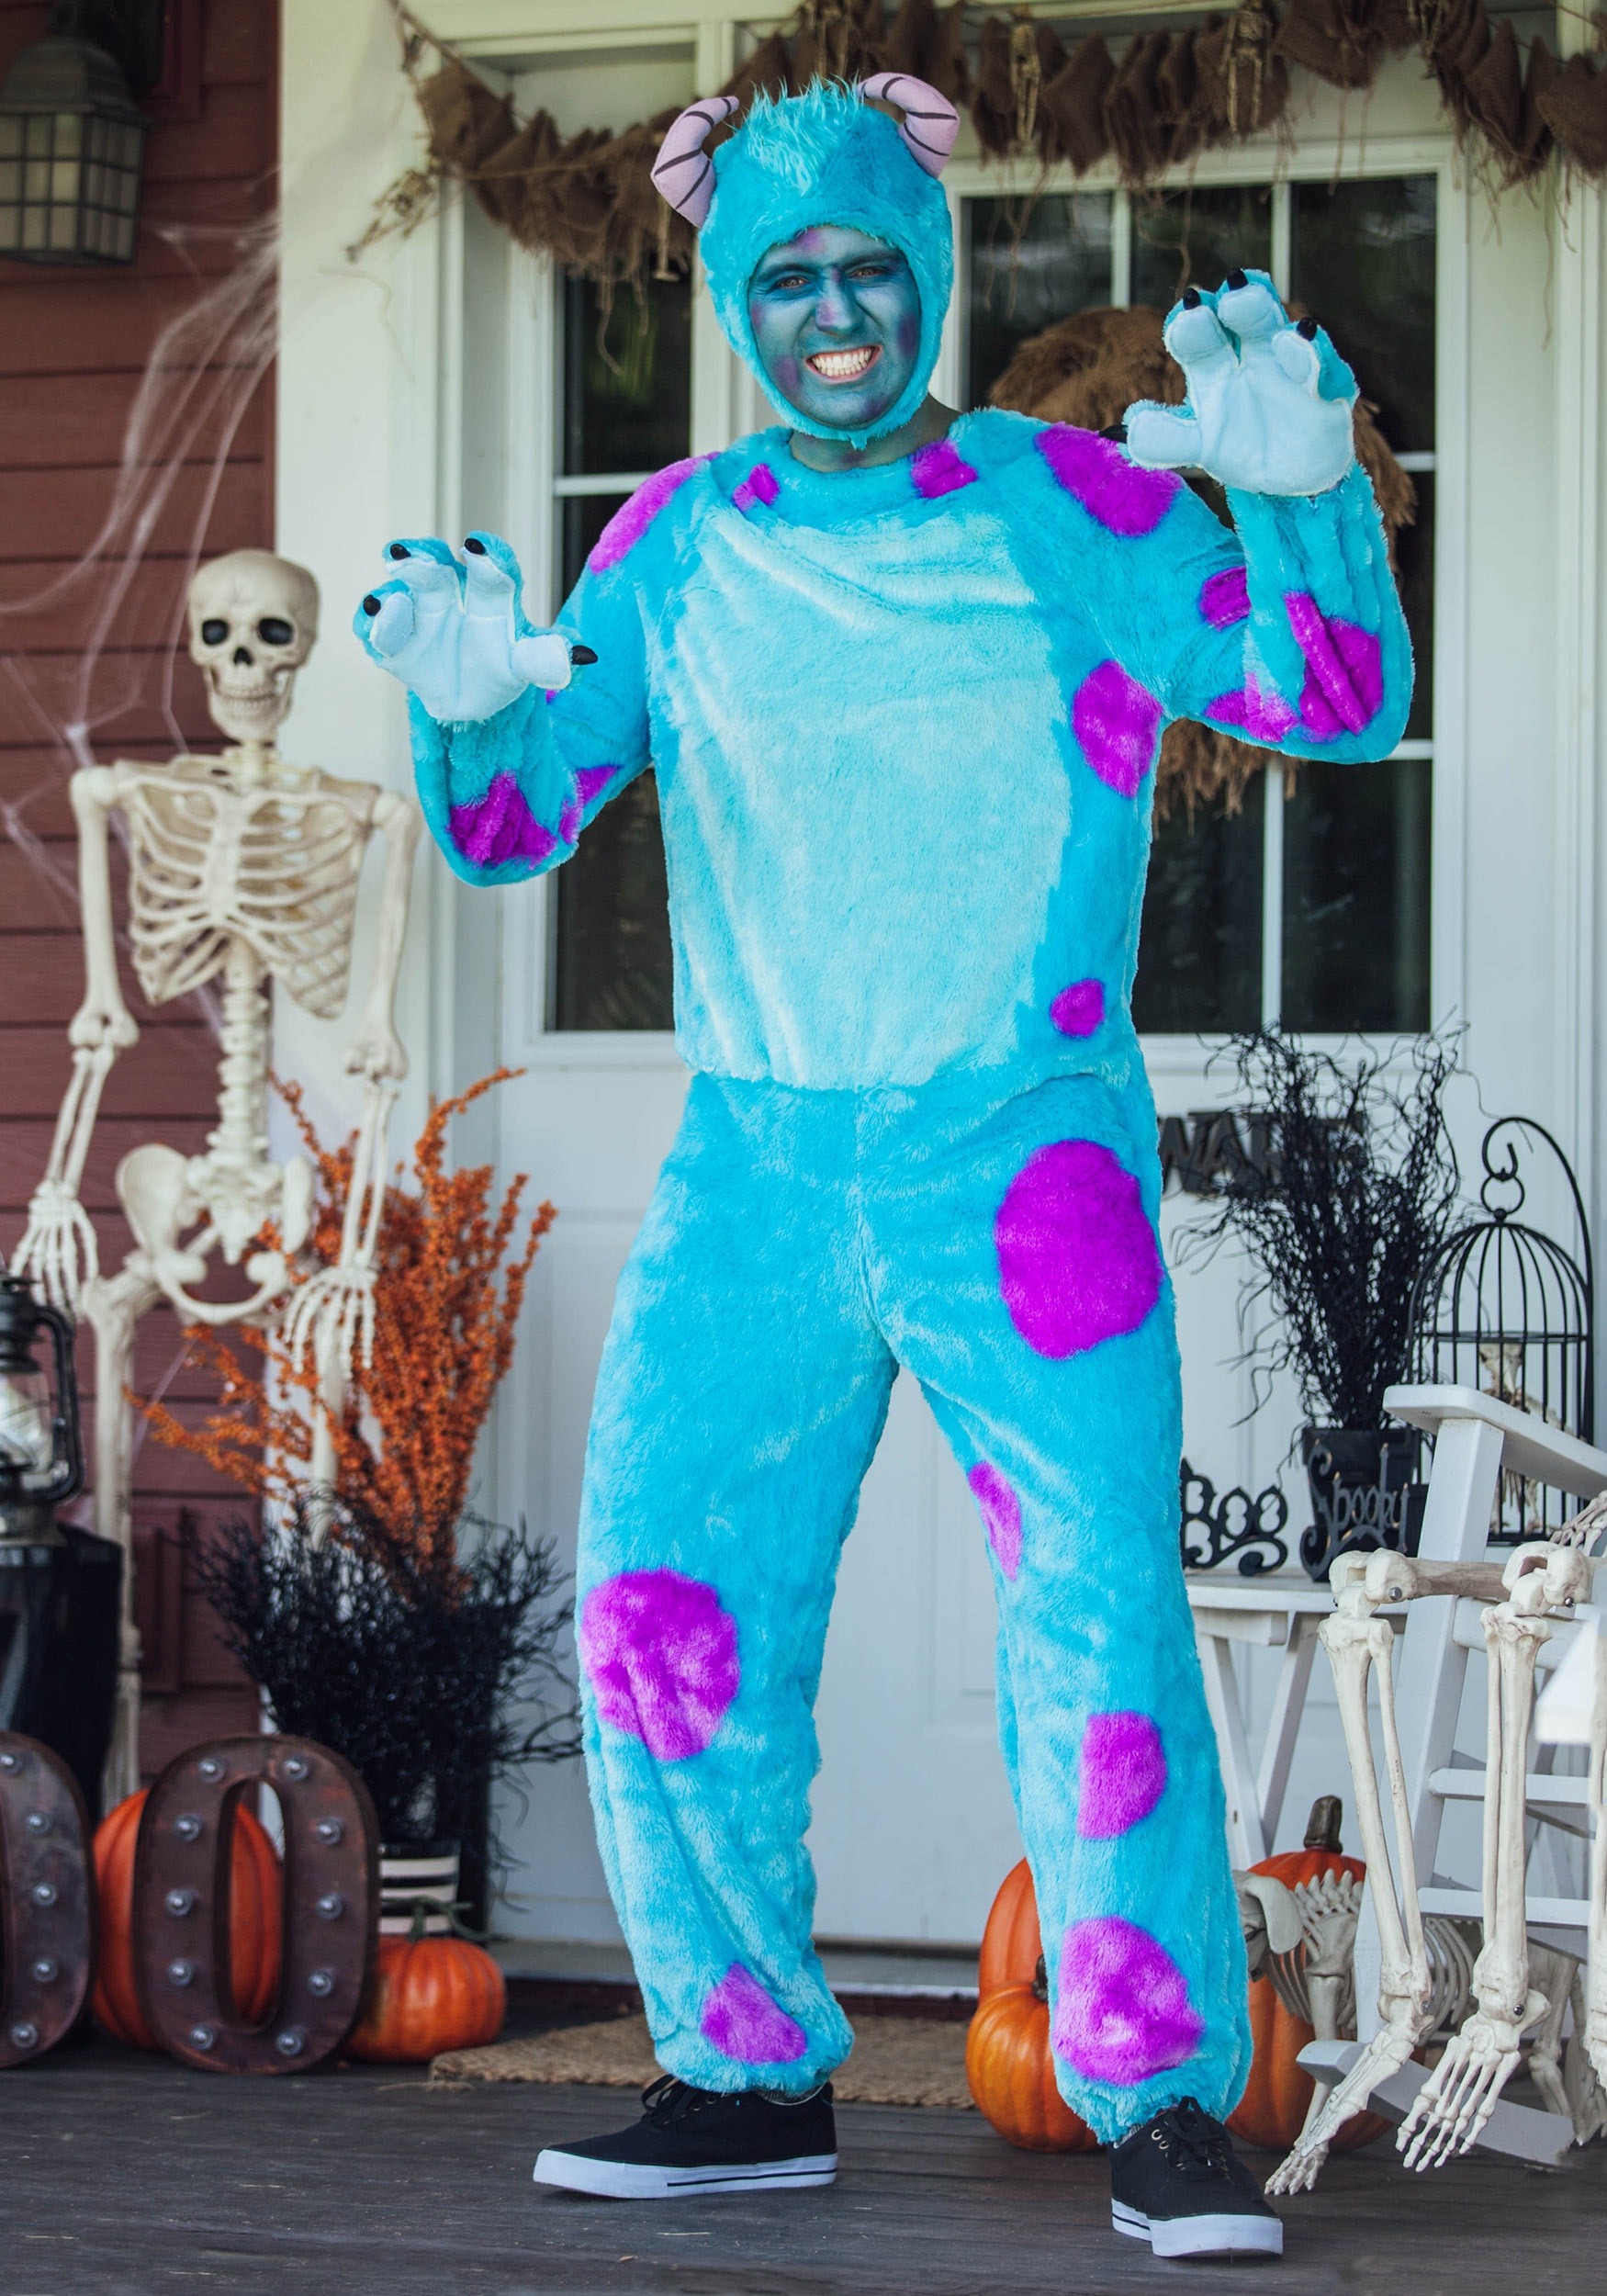 Adult Sulley Costume